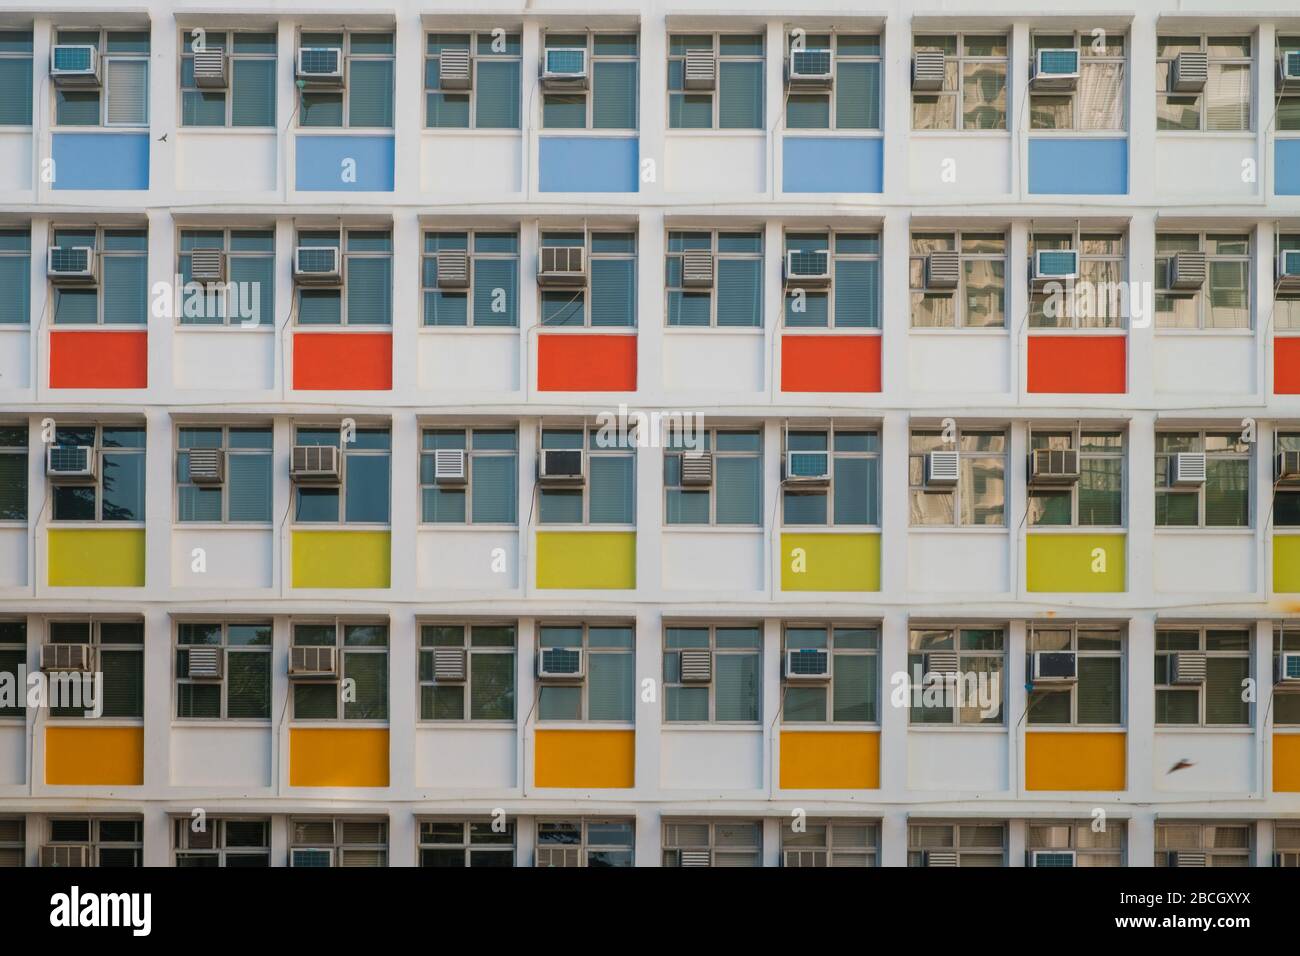 building facade exterior, colorful apartment house front Stock Photo